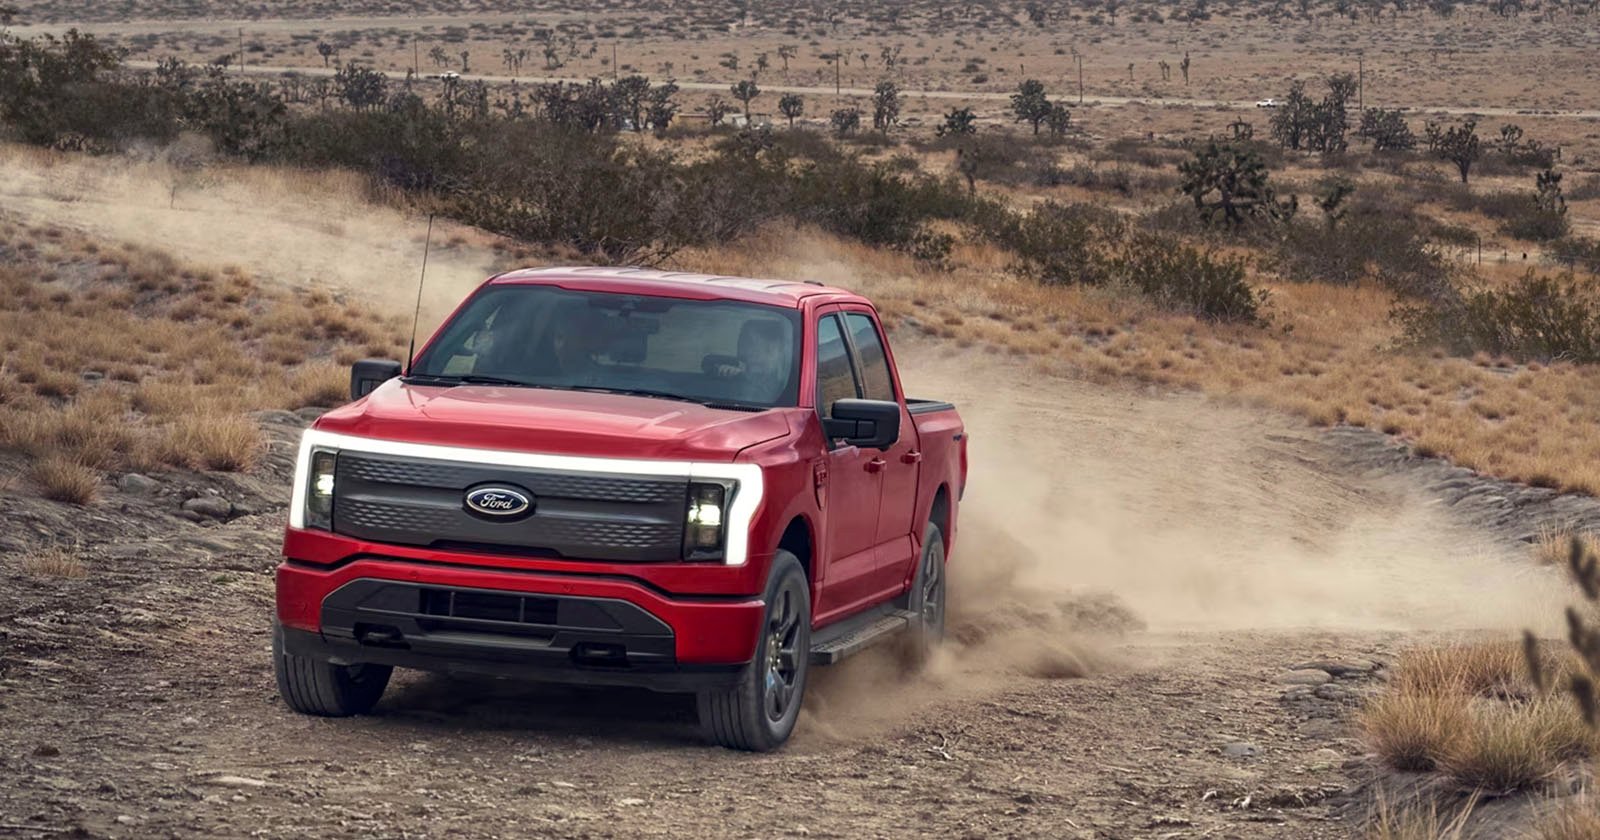  ford wants turn its vehicles into photography assistants 